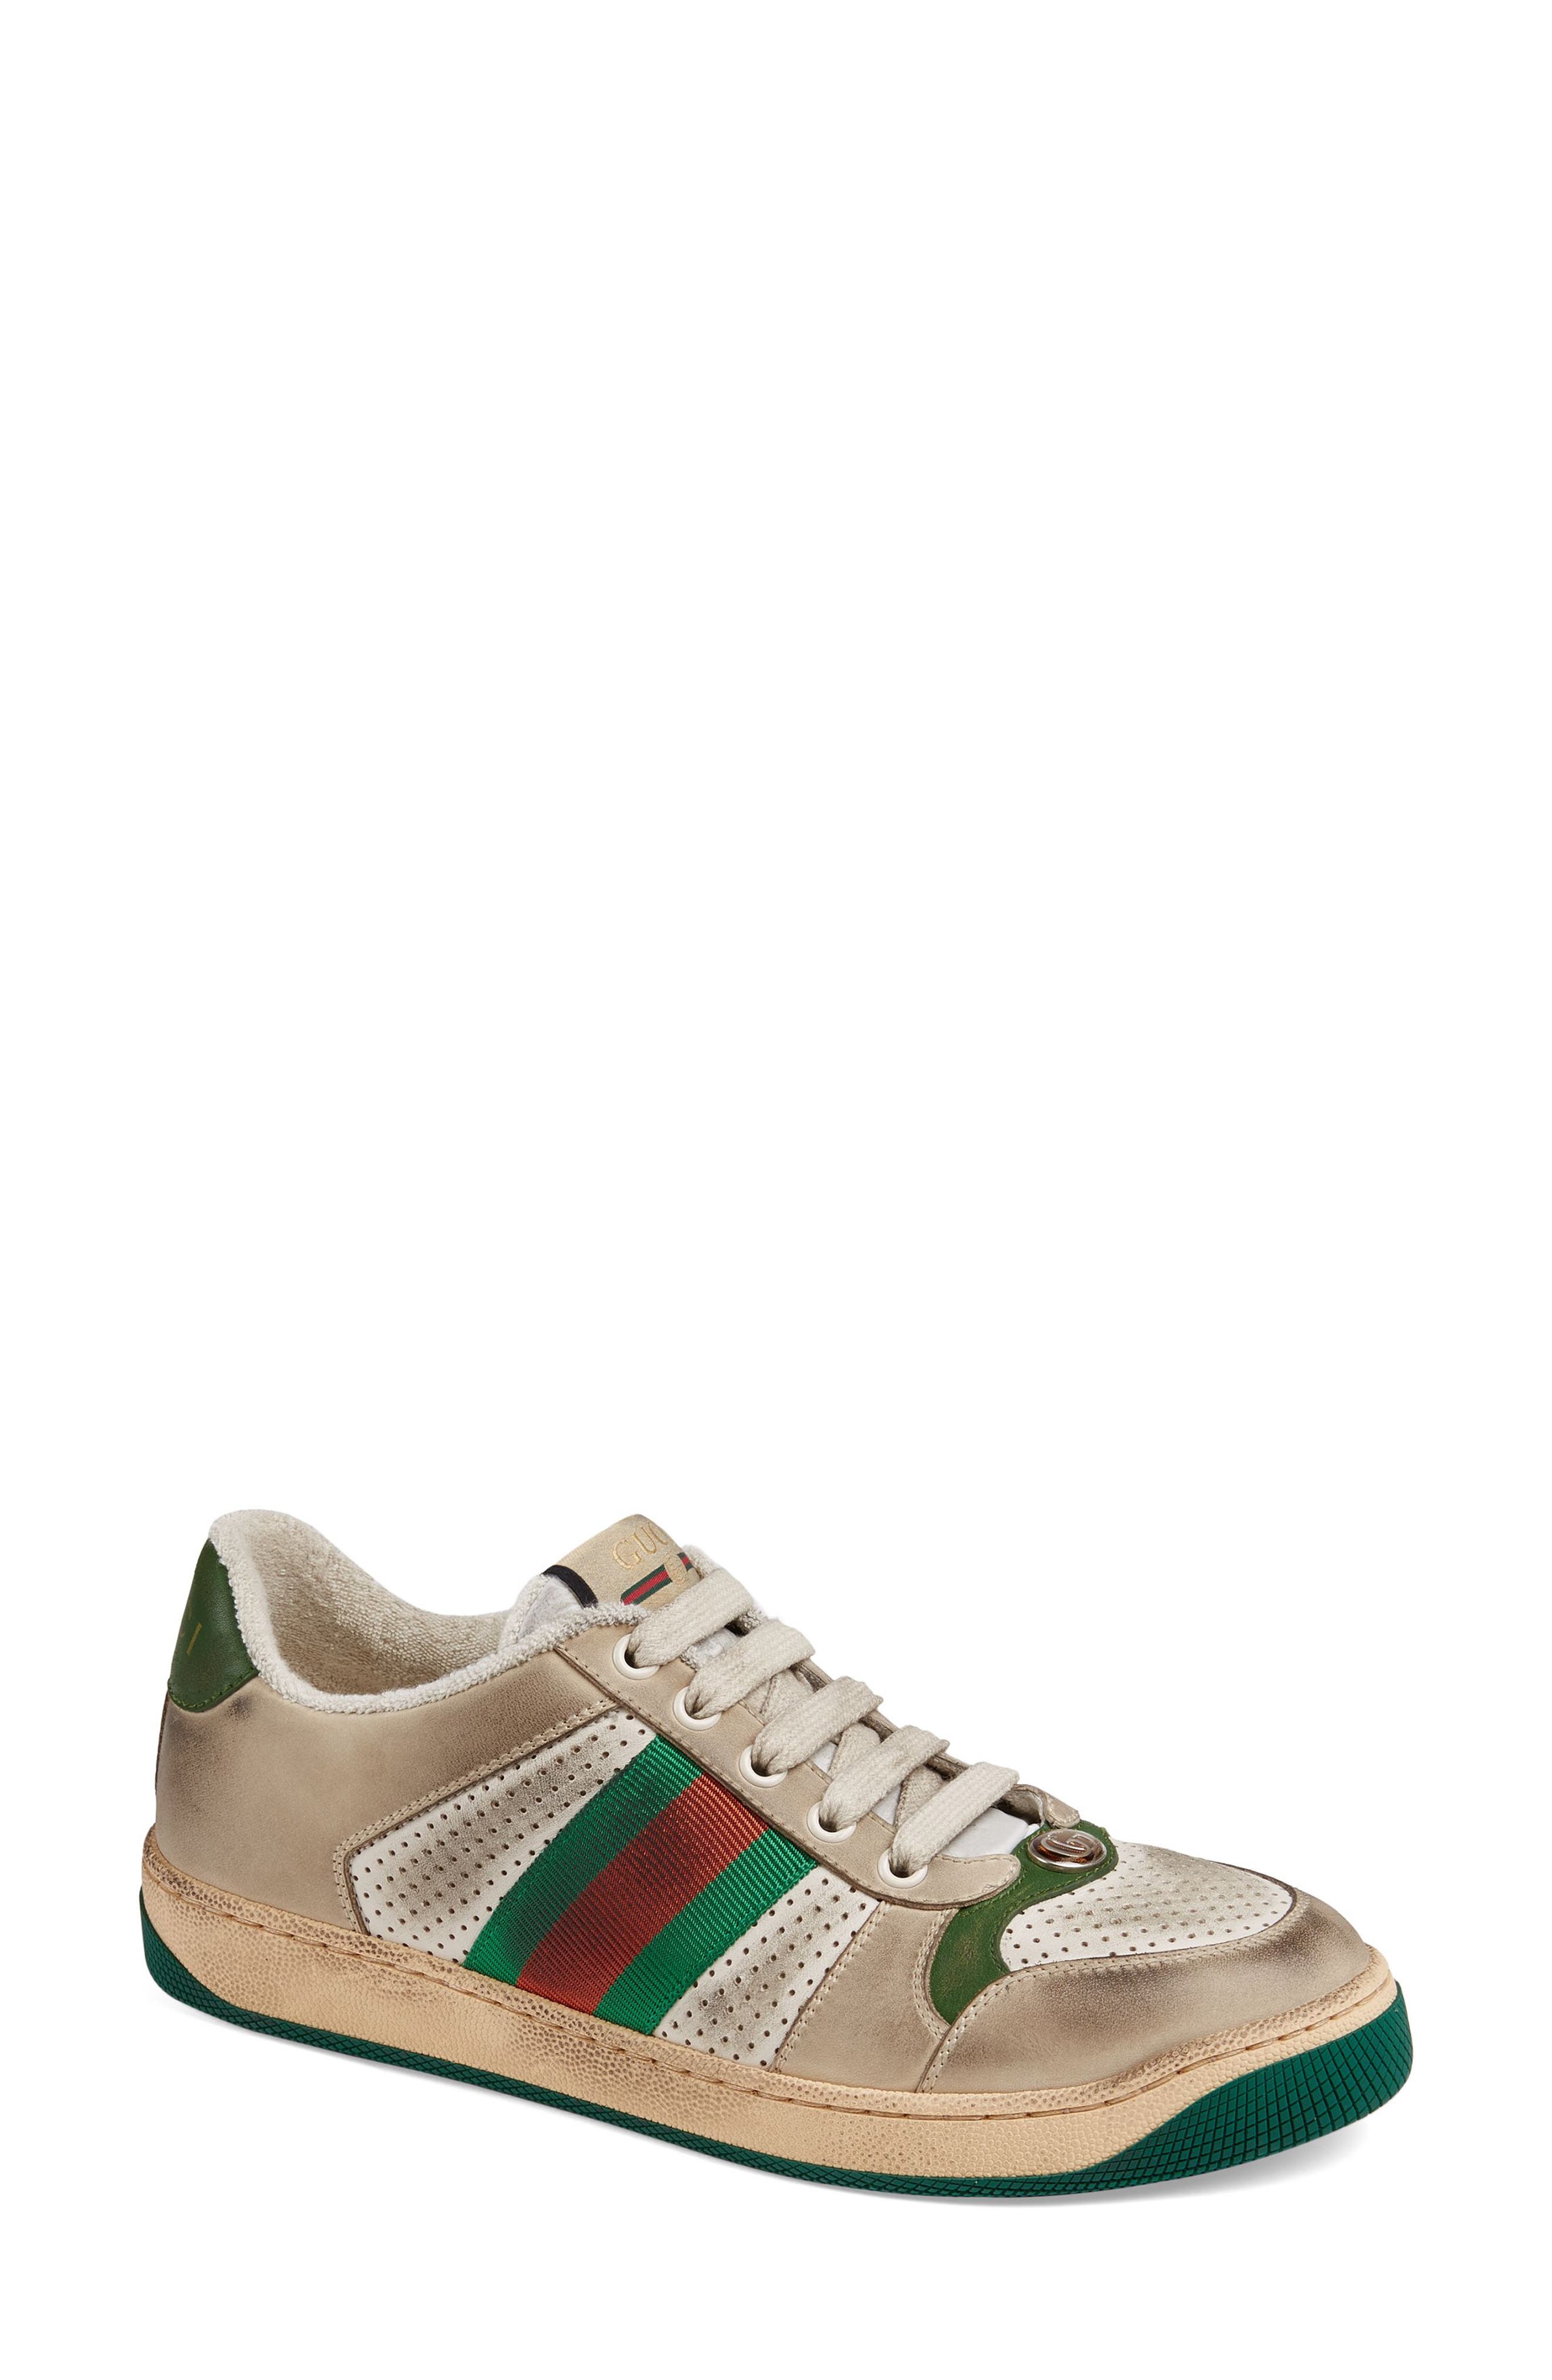 gucci sneakers new collection